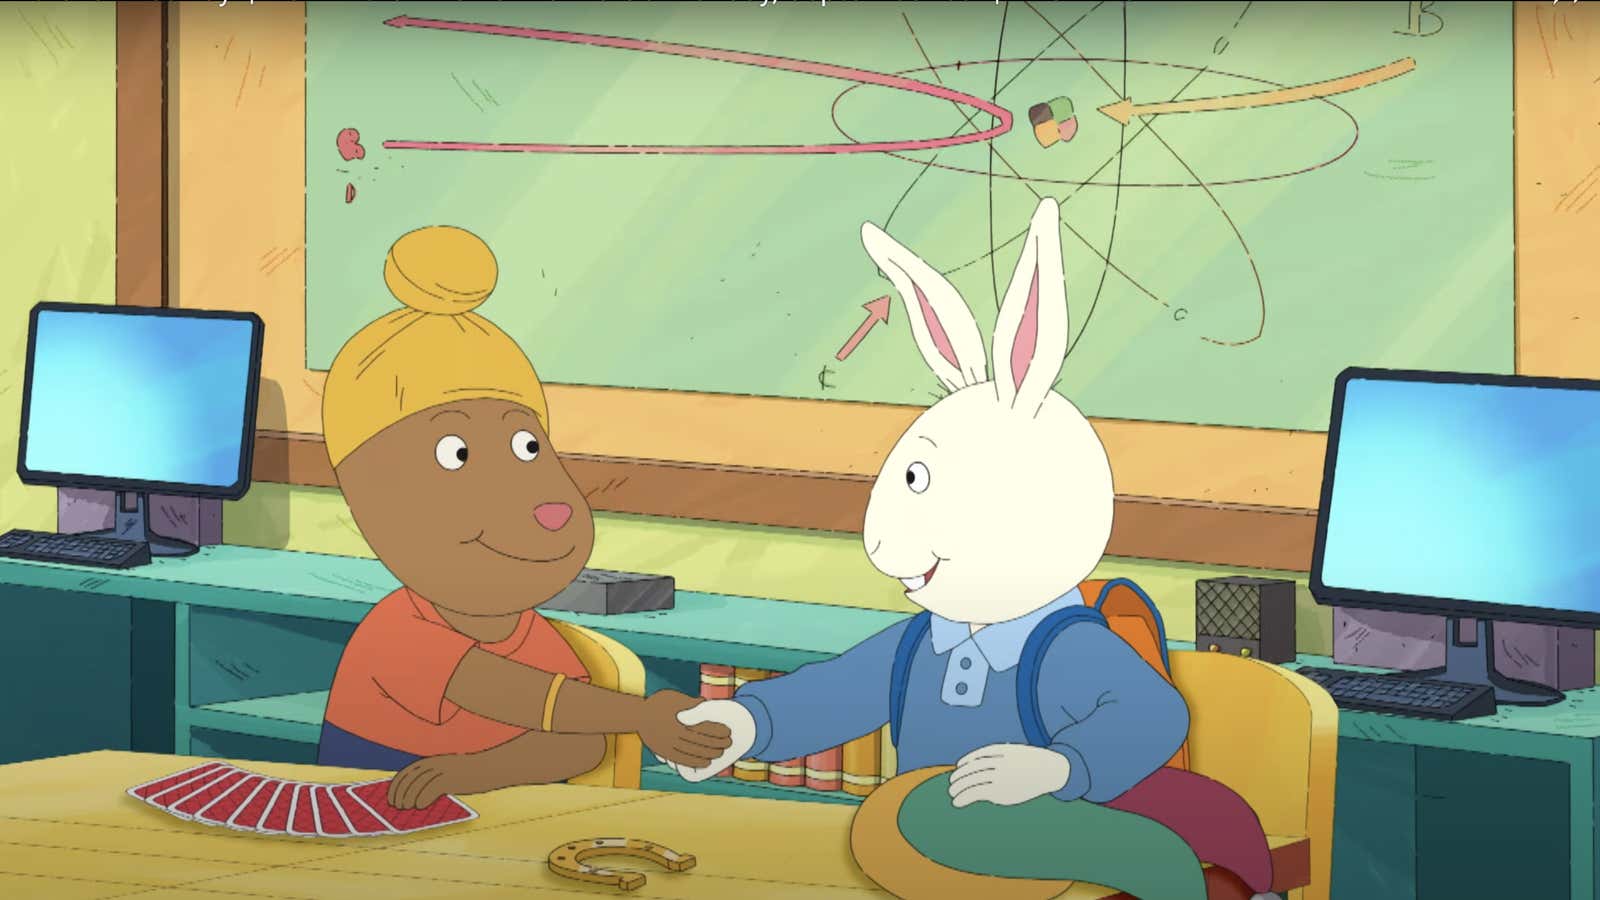 Arthur’s First Day introduces a new friend.